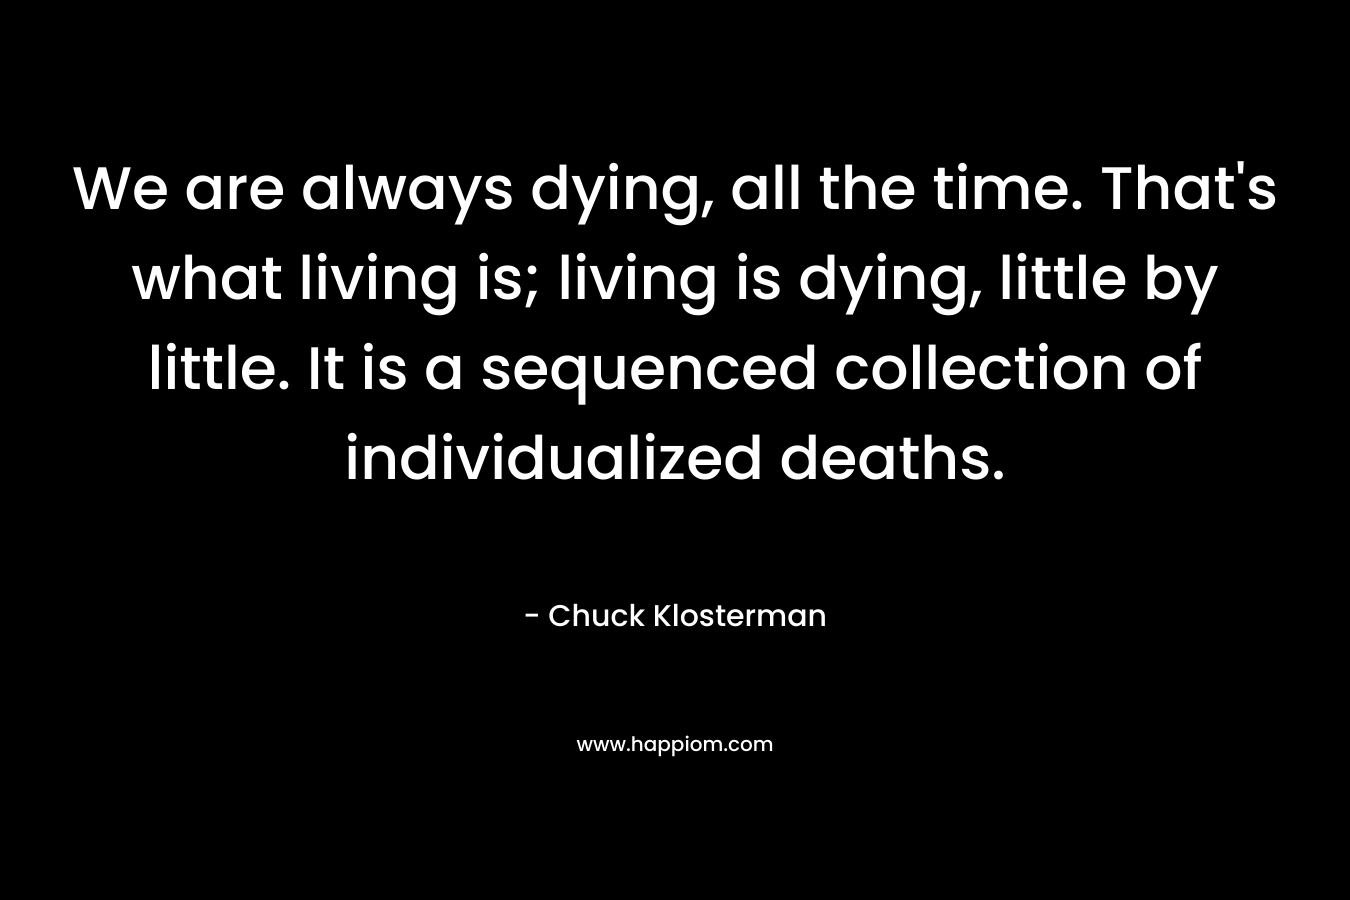 We are always dying, all the time. That’s what living is; living is dying, little by little. It is a sequenced collection of individualized deaths. – Chuck Klosterman